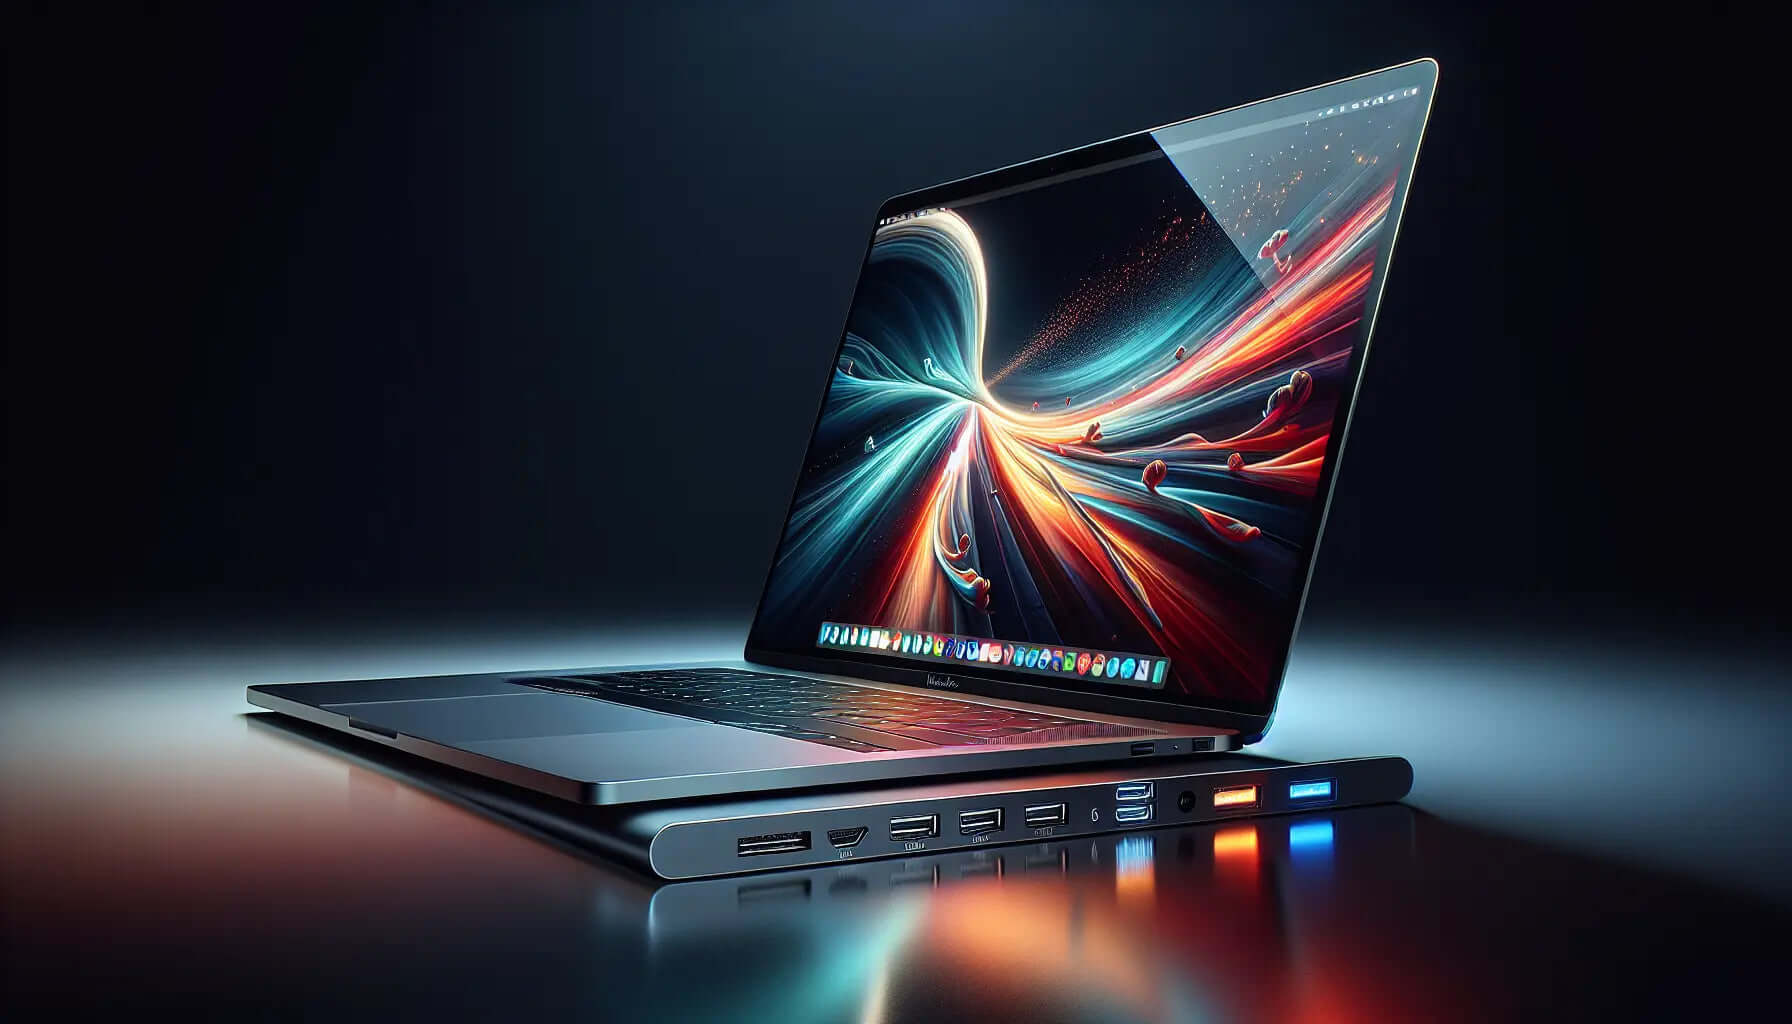 Apple MacBook Pro 2010: Features, Connectivity, Design, Performance, and More